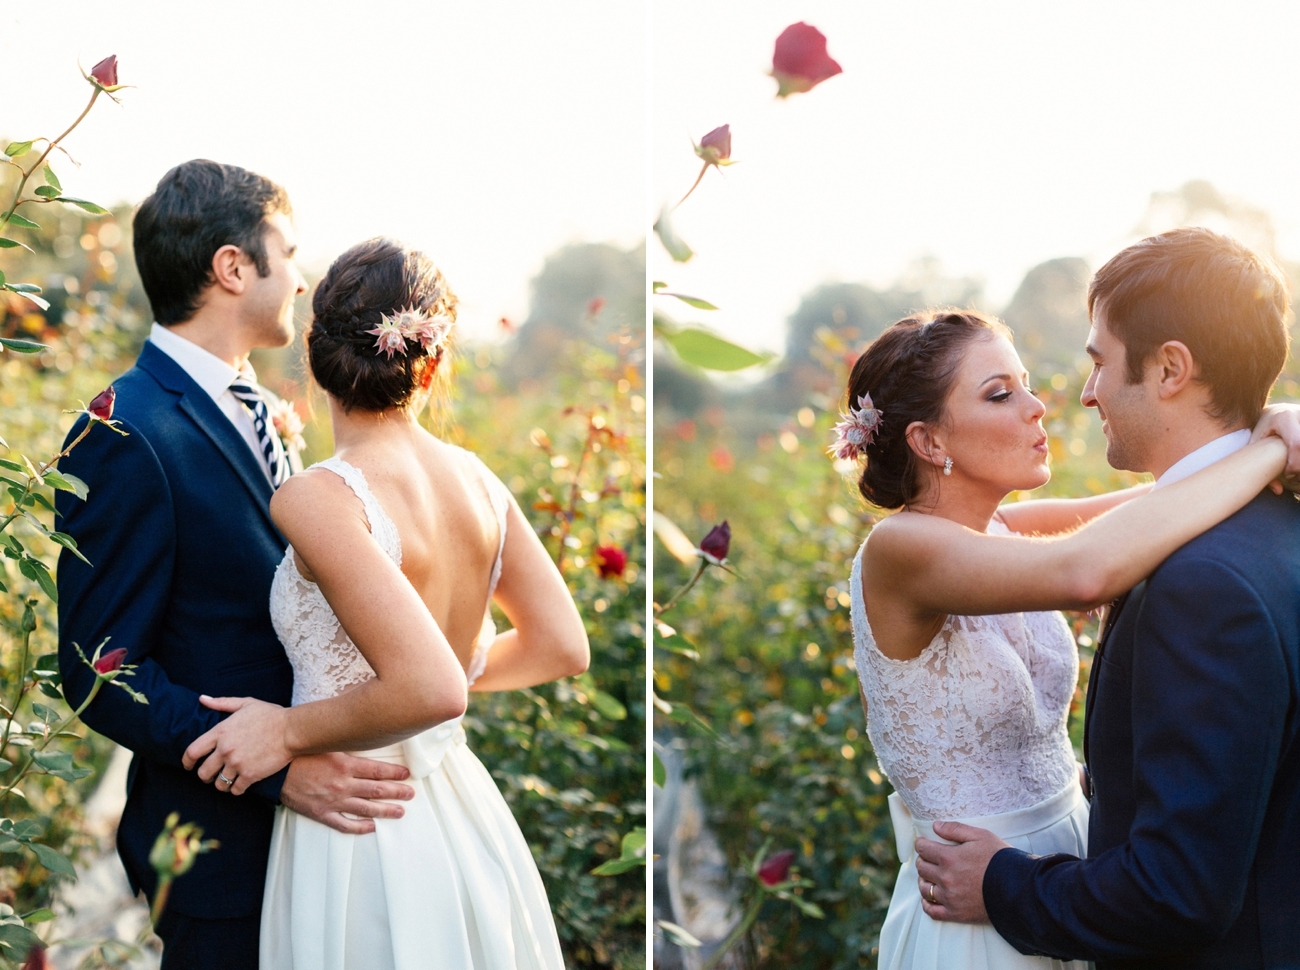 Pretty Rustic Wedding with a Touch of Delft | Images: Marli Koen